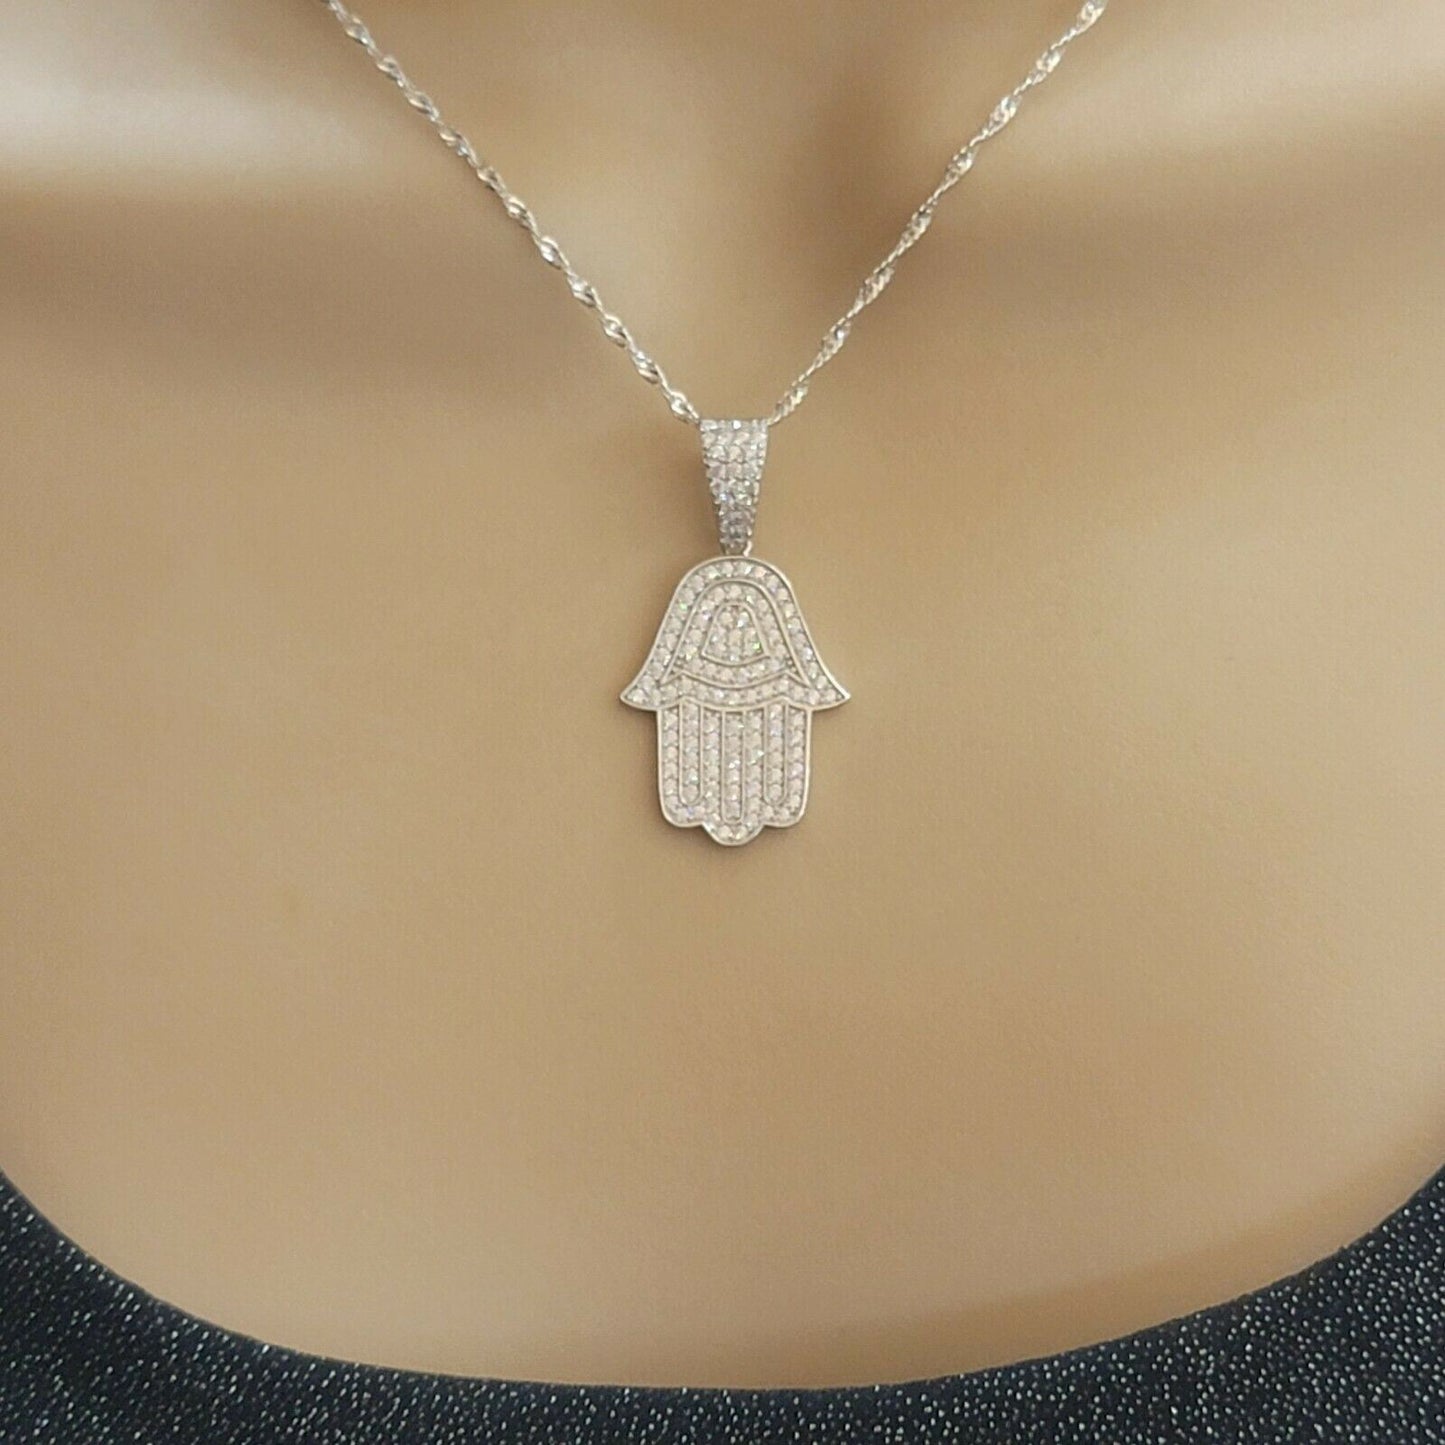 Solid 925 Sterling Silver. Hamsa Hand Iced Pendant Necklace.